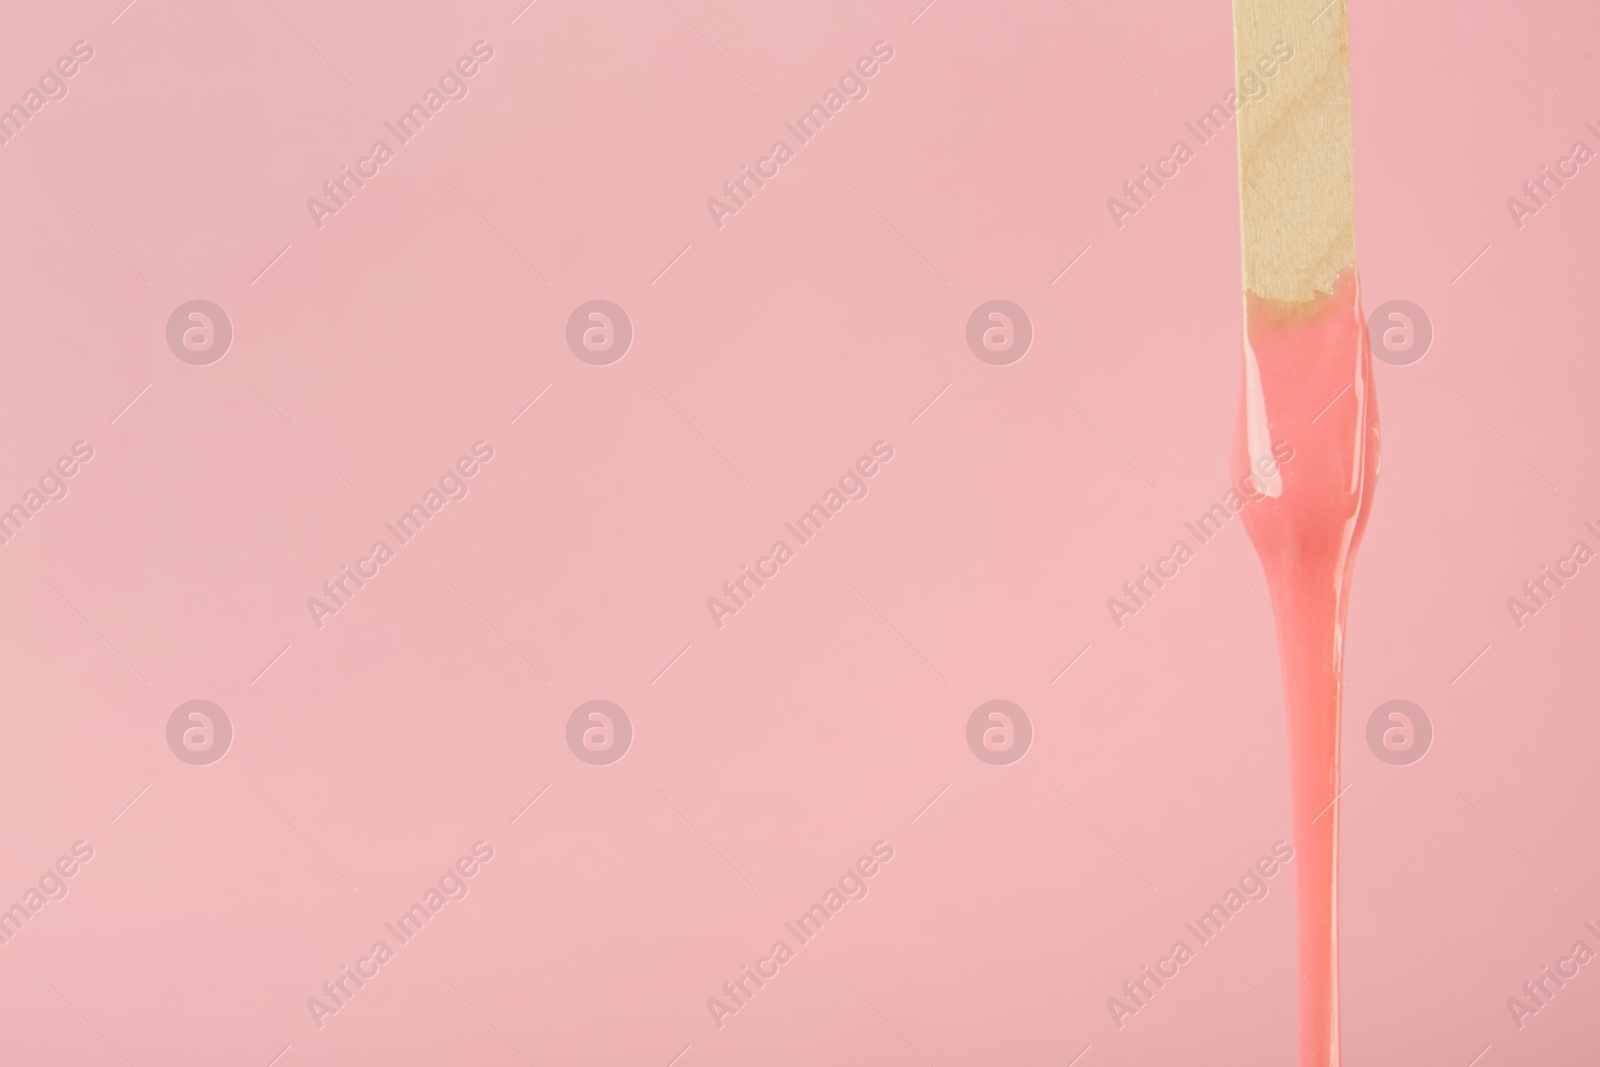 Photo of Wooden spatula with hot depilatory wax on pink background. Space for text